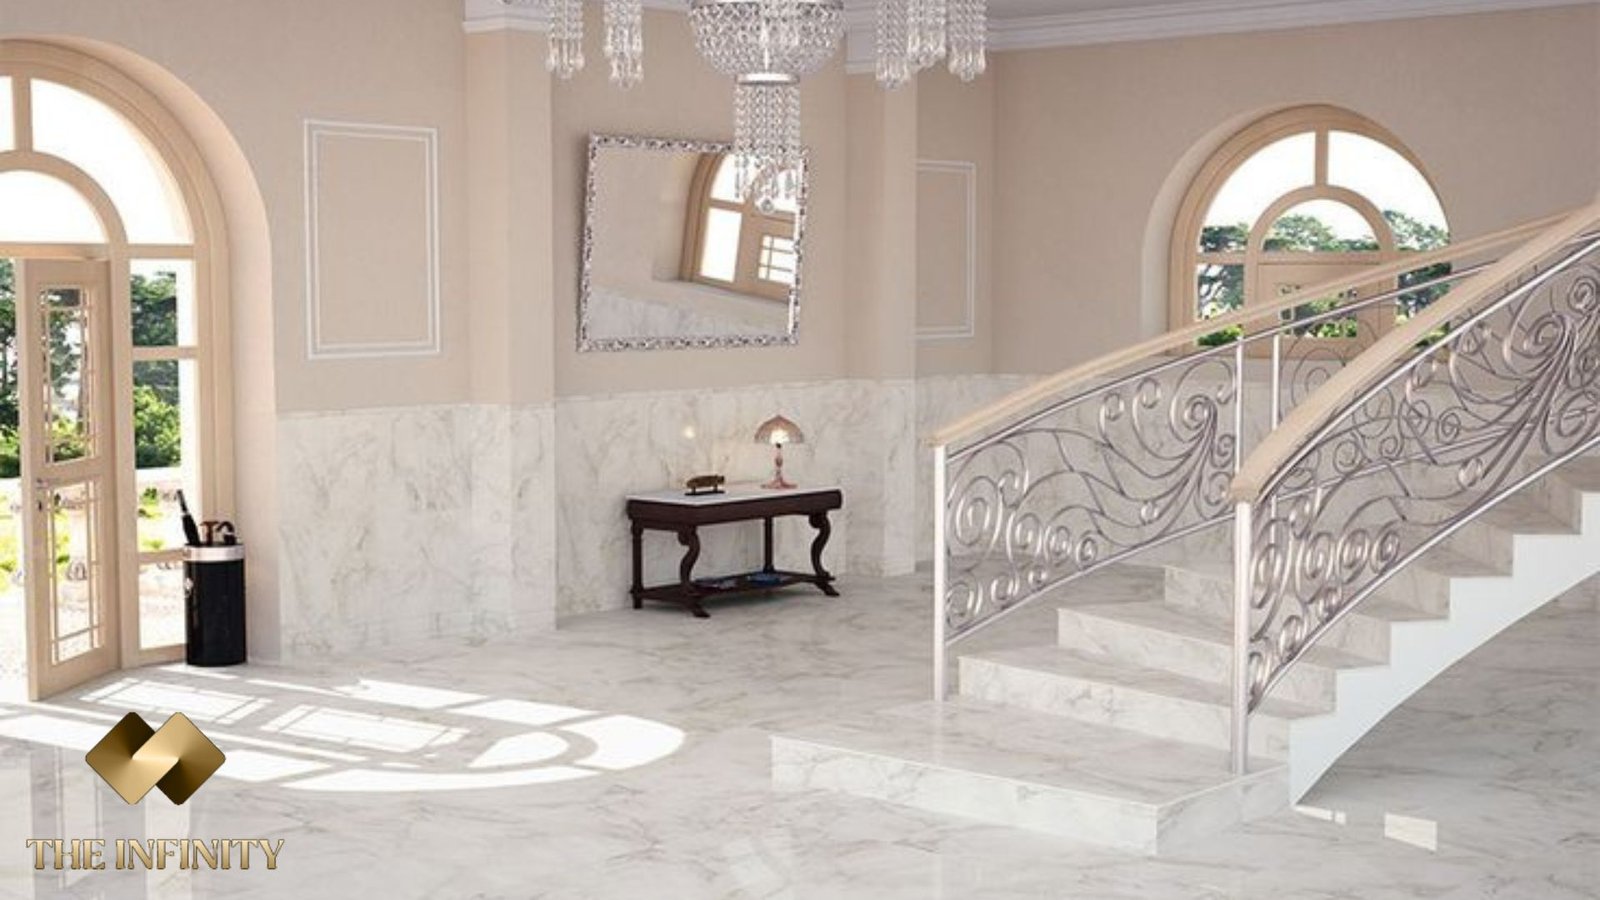 Carrara marble: origin, price, types, uses, and the best suppliers